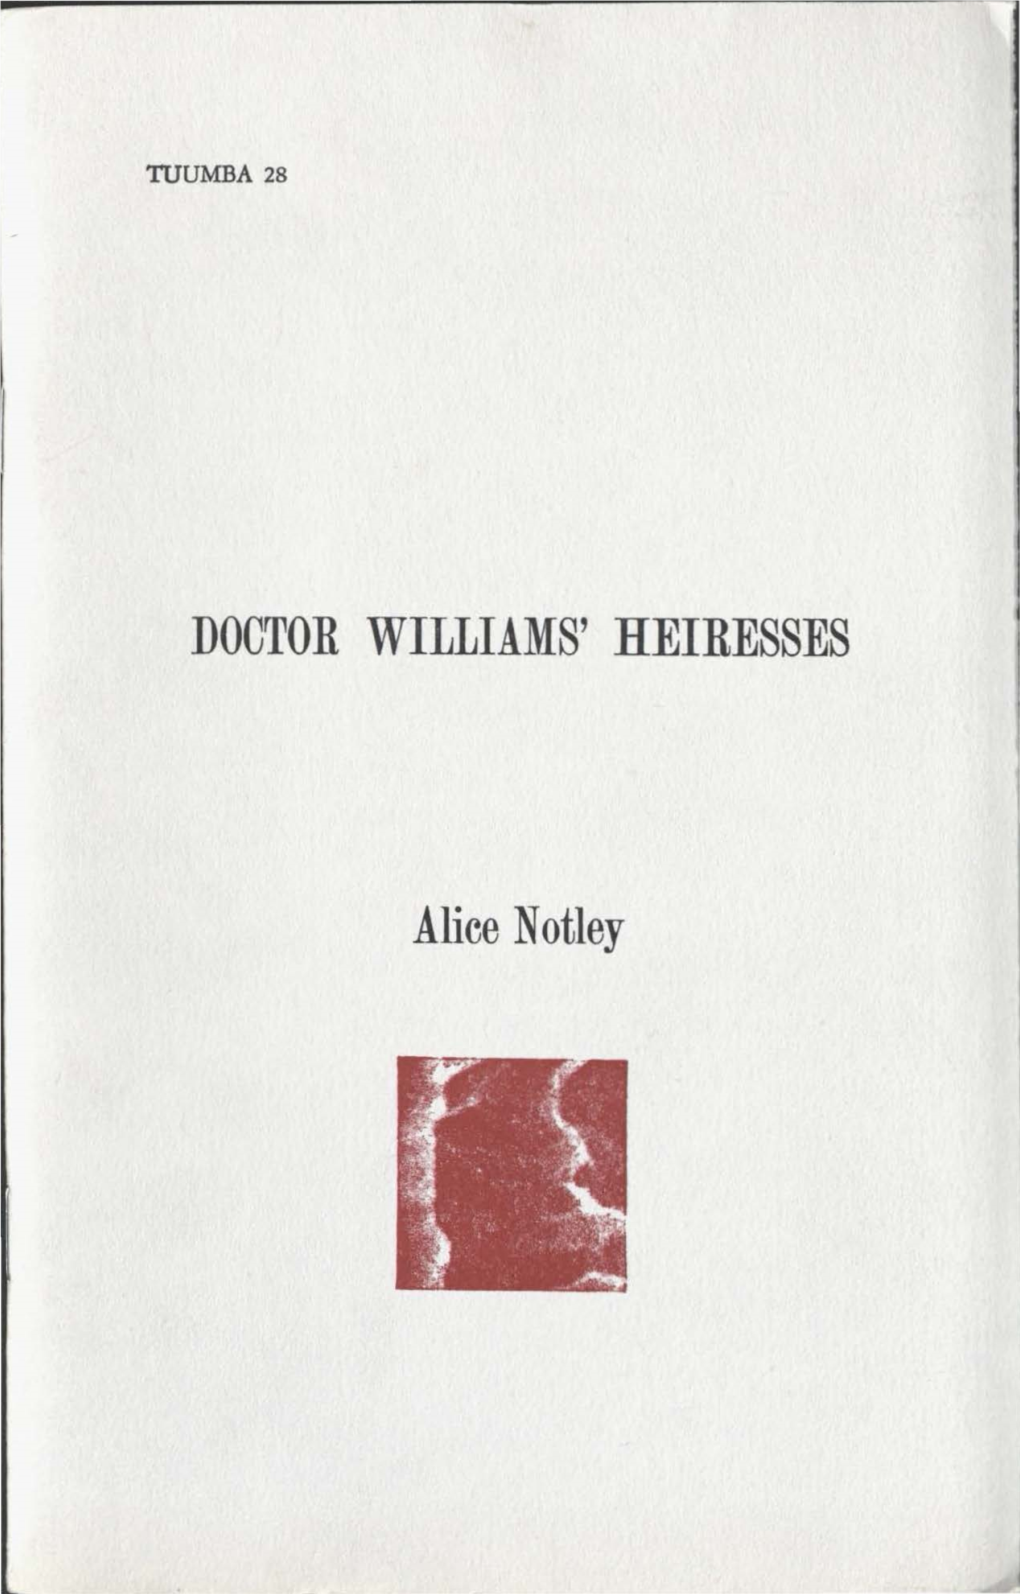 Doctor Williams' Heiresses